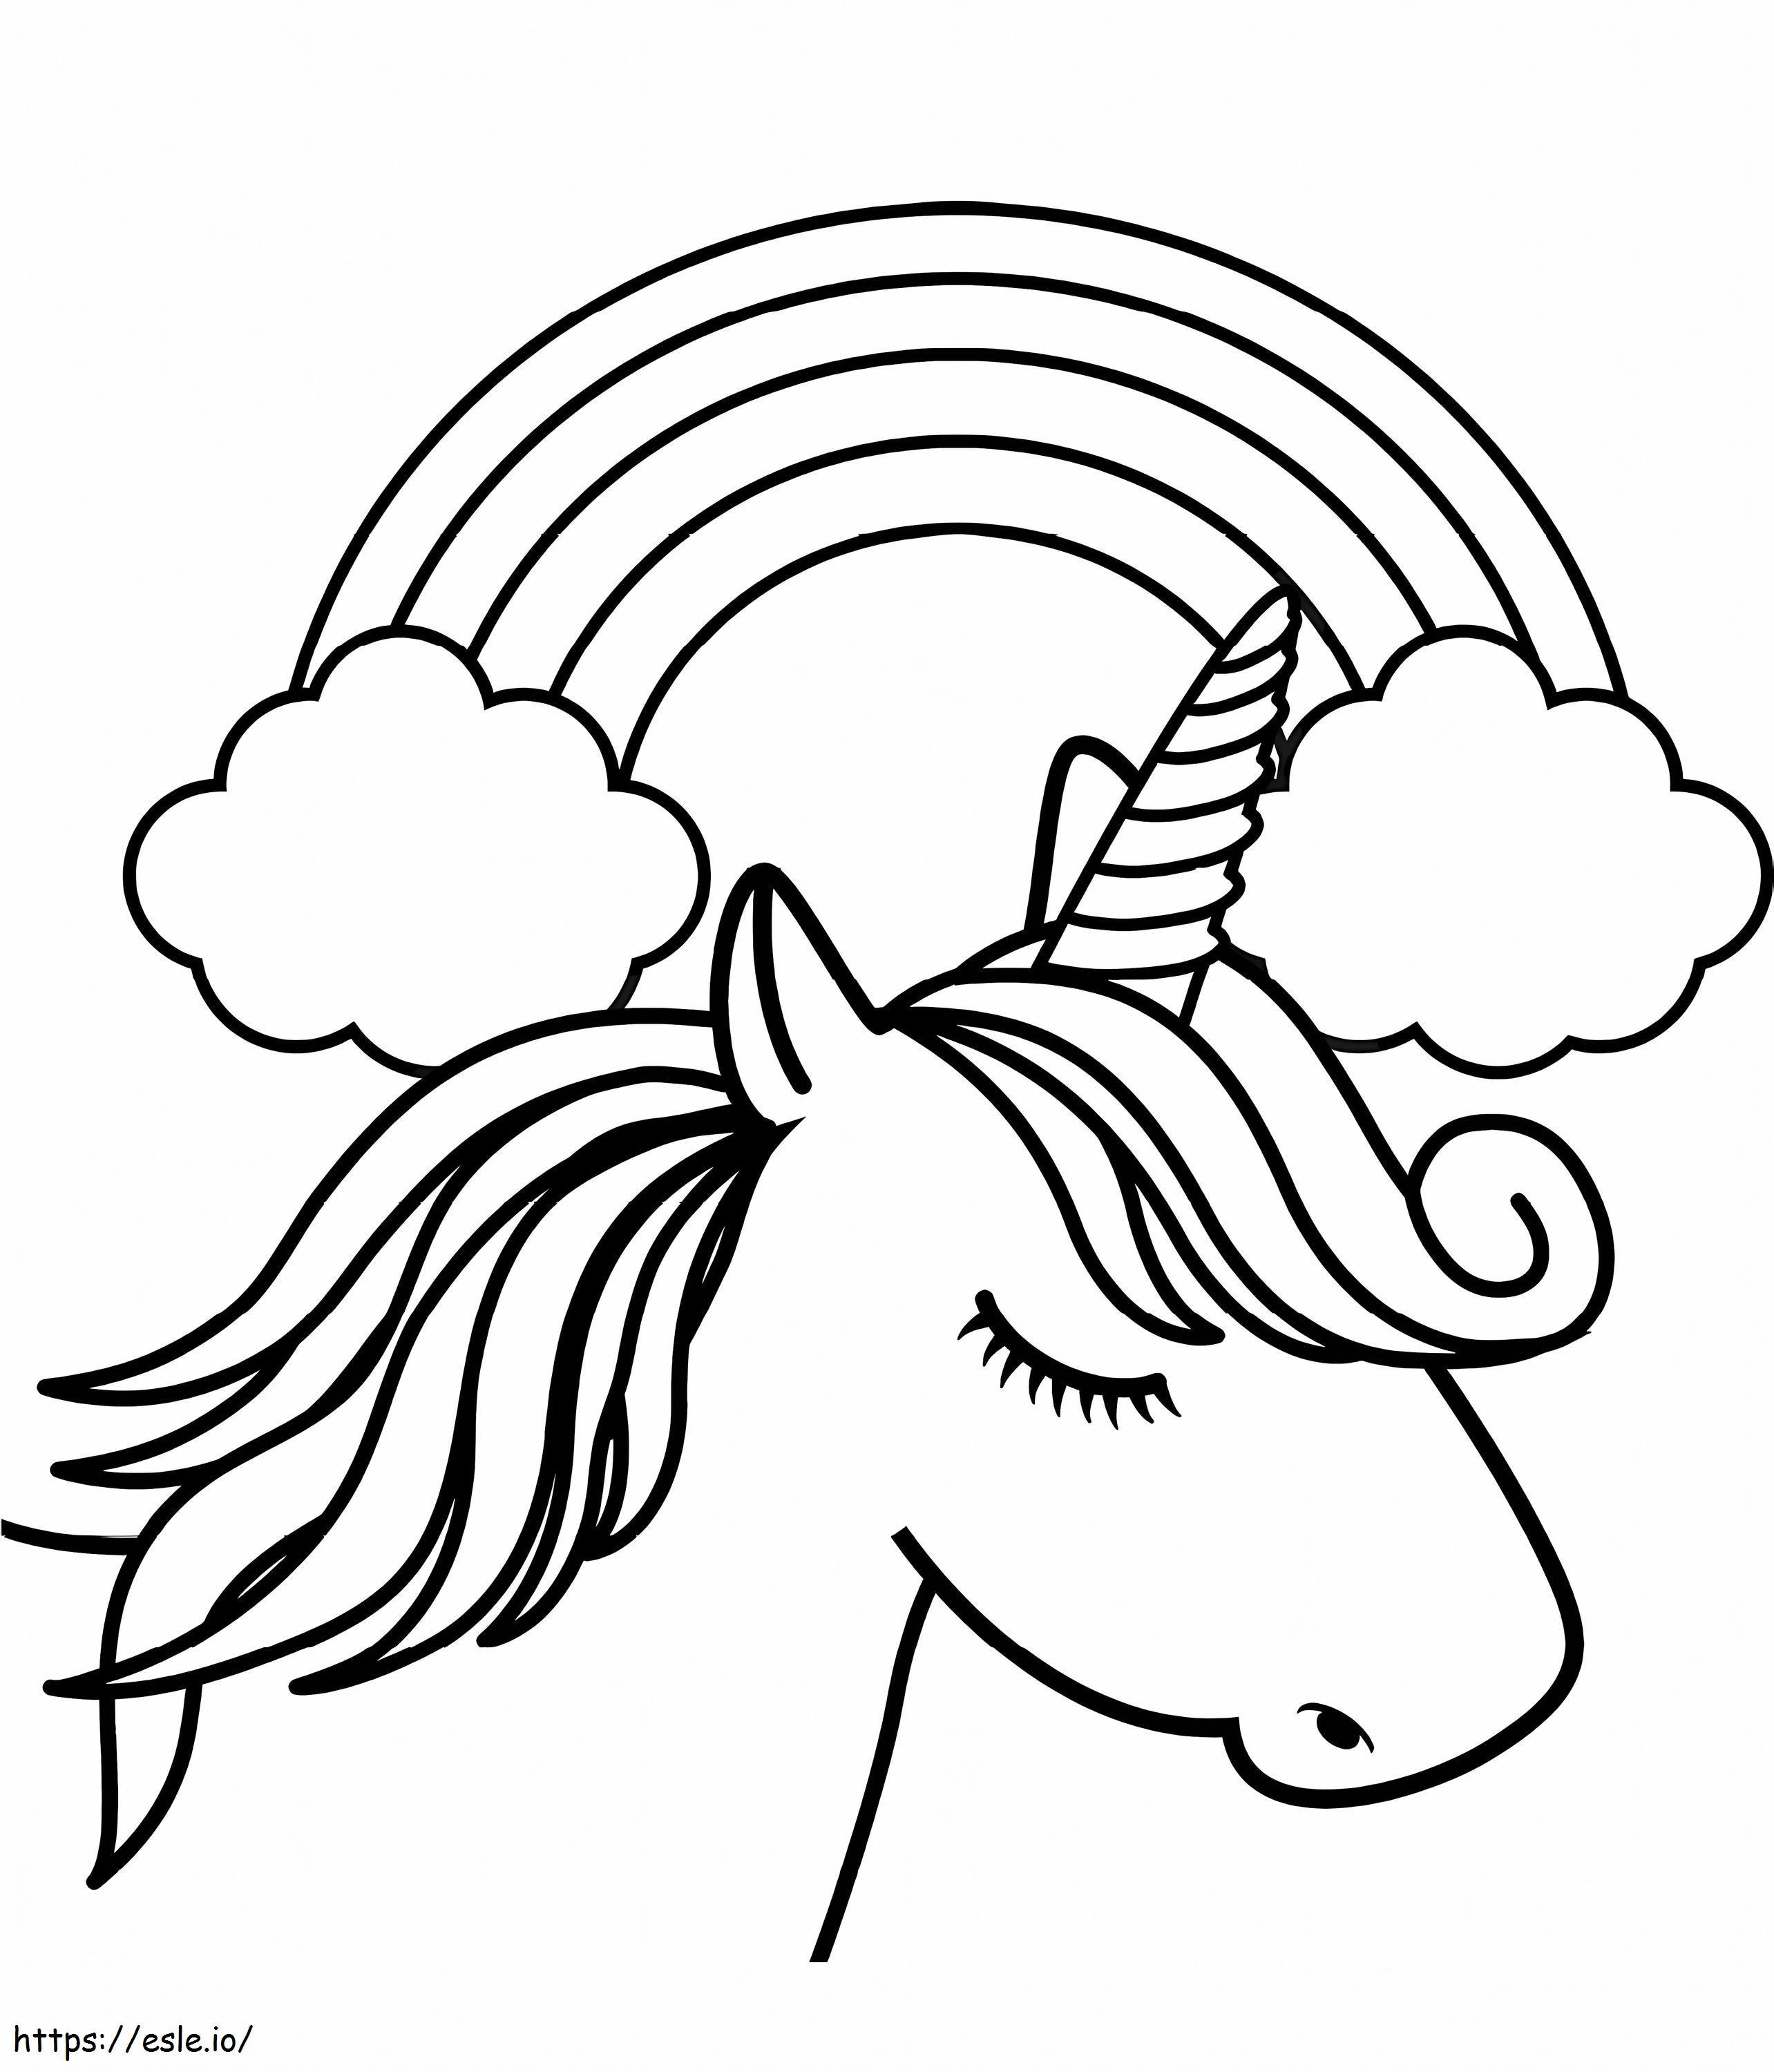 1564622726 Unicorn Head In Front Of Rainbow A4 coloring page